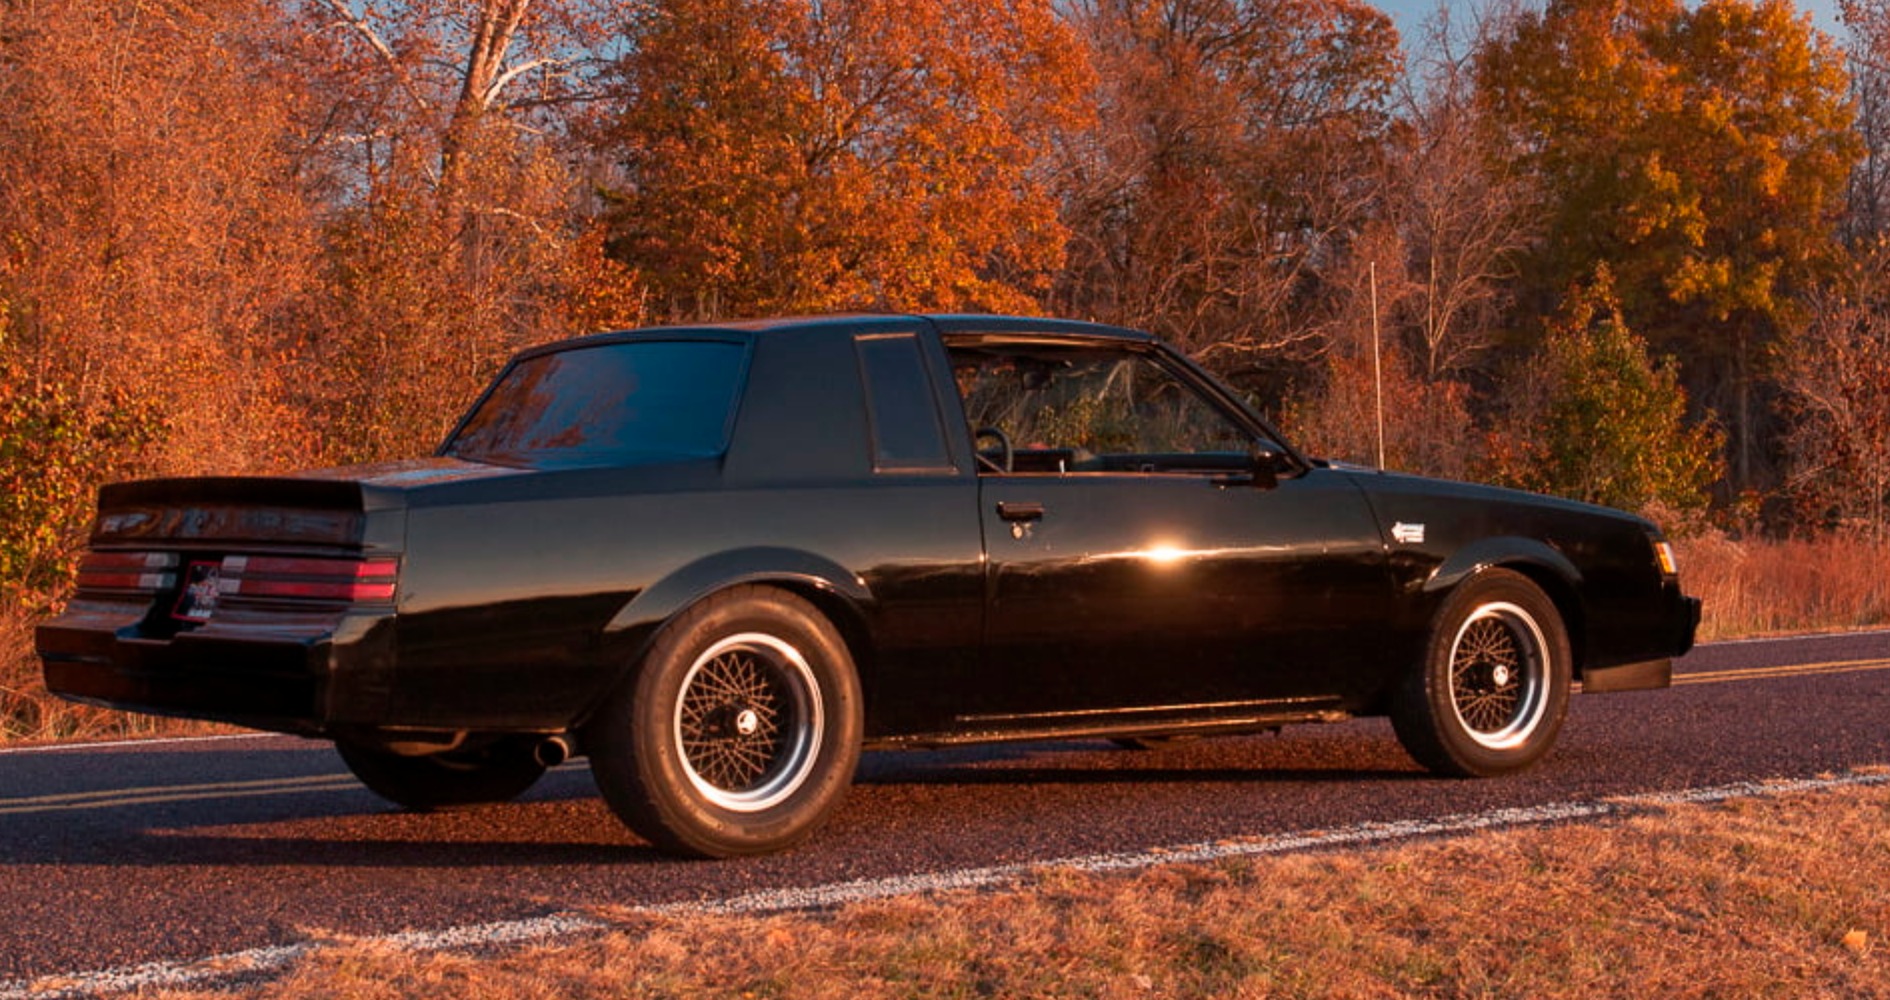 Used 1987 Buick Grand National -LOW MILES-T TOPS-2 OWNER-NICE PAINT-GNX WHEELS- | Mundelein, IL